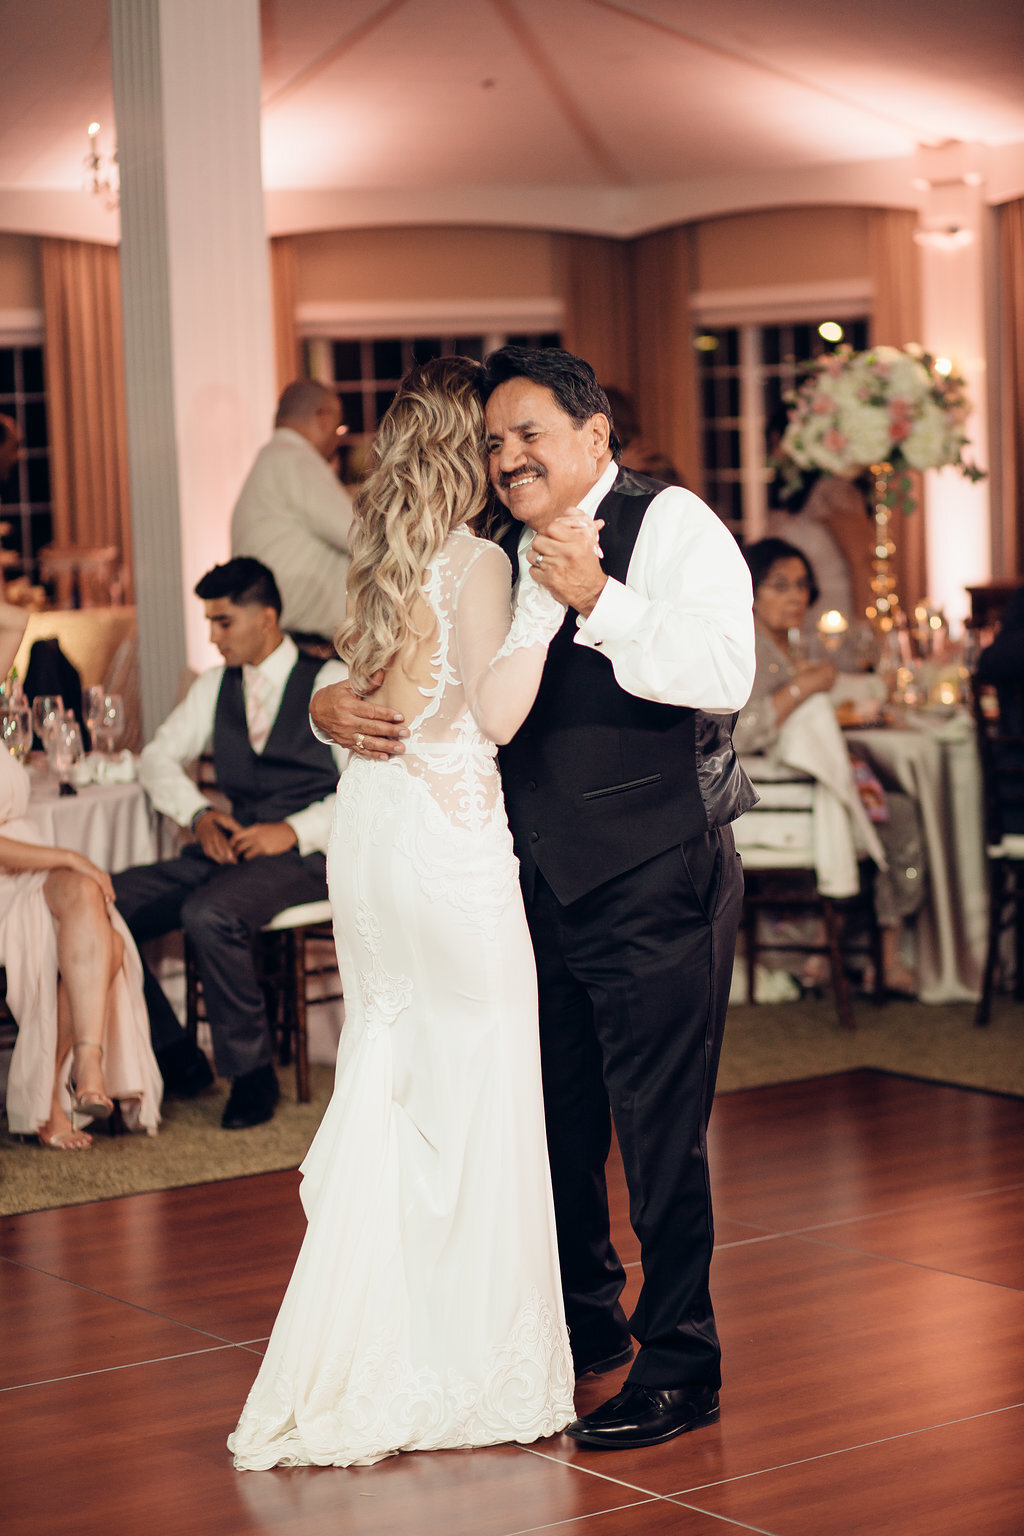 Wedding Photograph Of Man In Black Suit Smiling While Dancing With The Bride Los Angeles